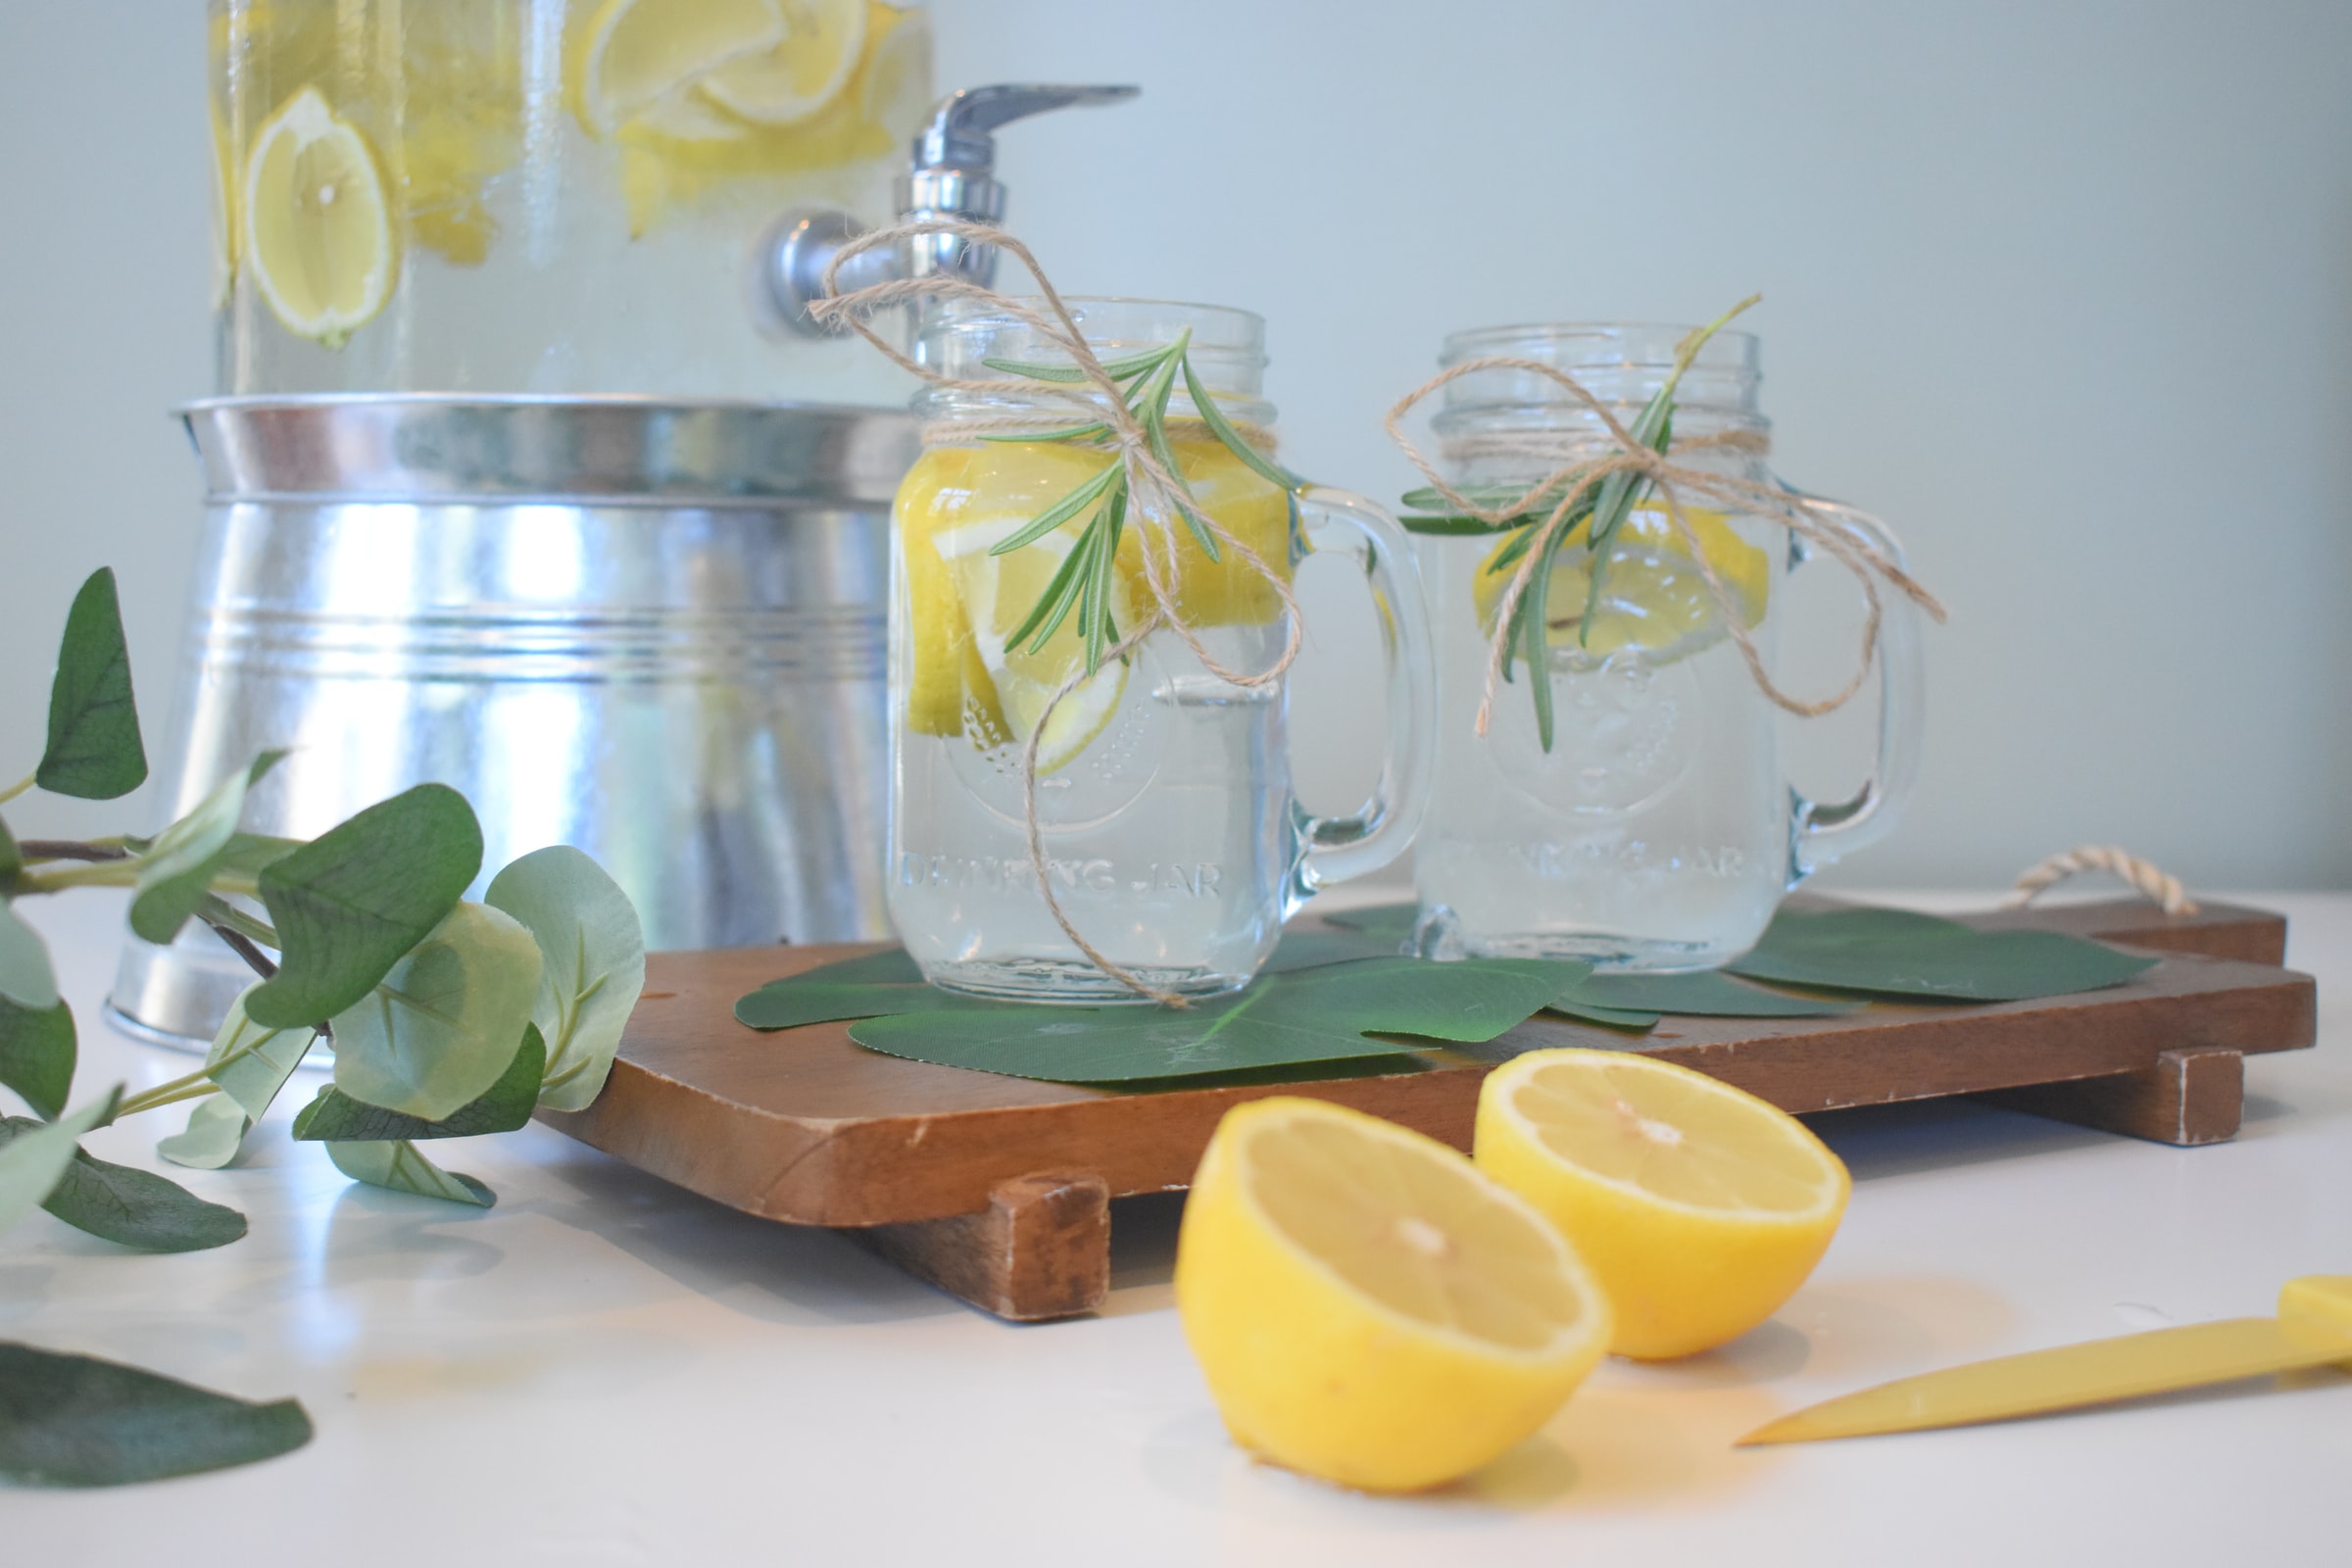 Water glasses & jug with lemon and herbs